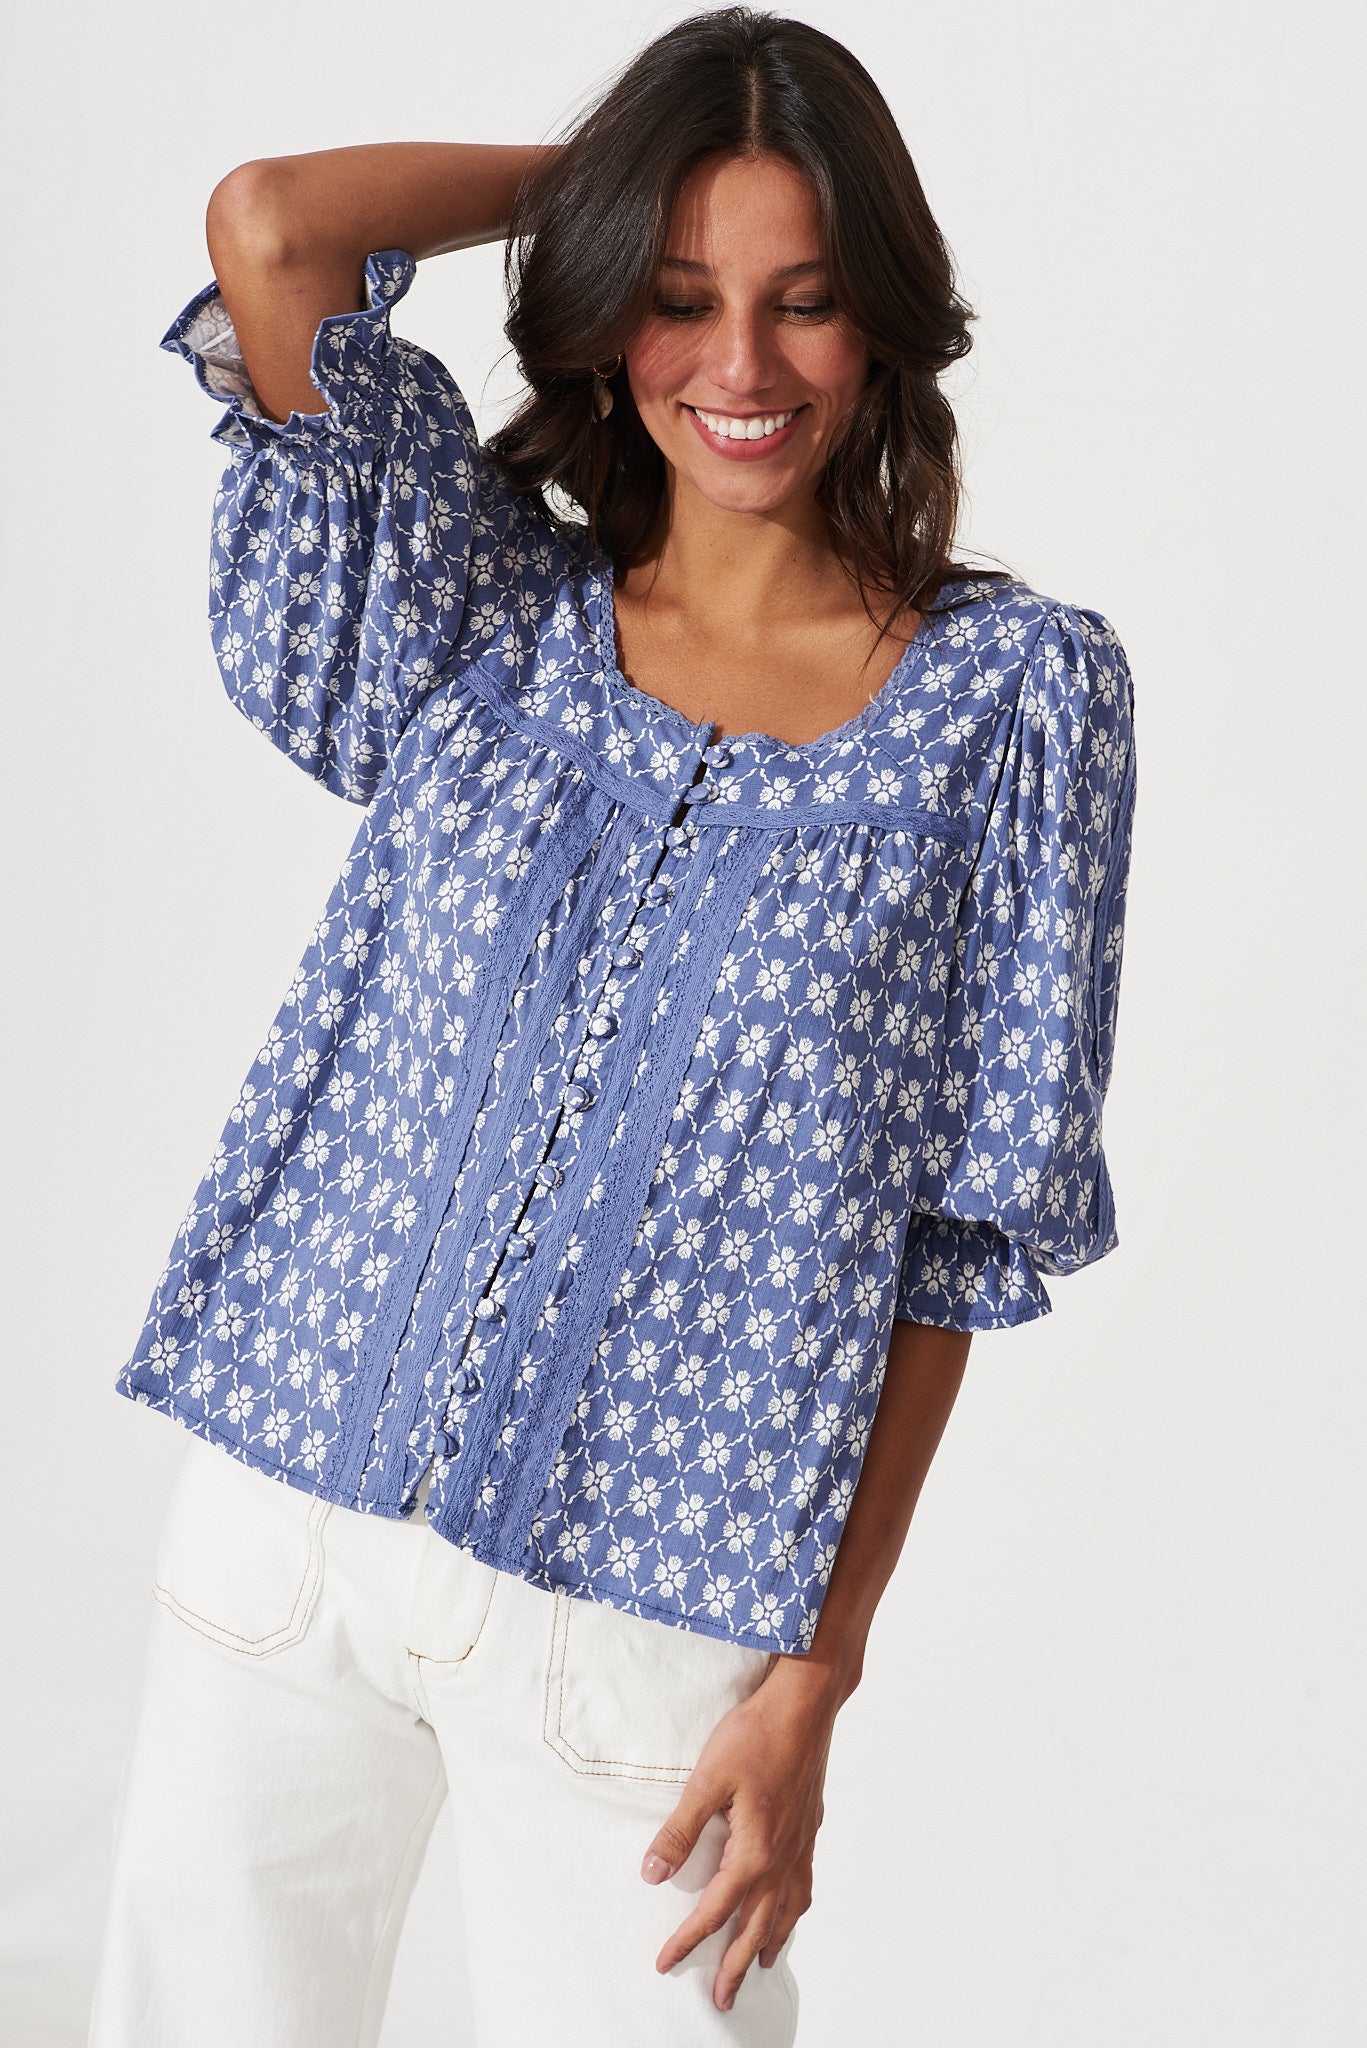 Moonflower Top In Blue With White Print - front